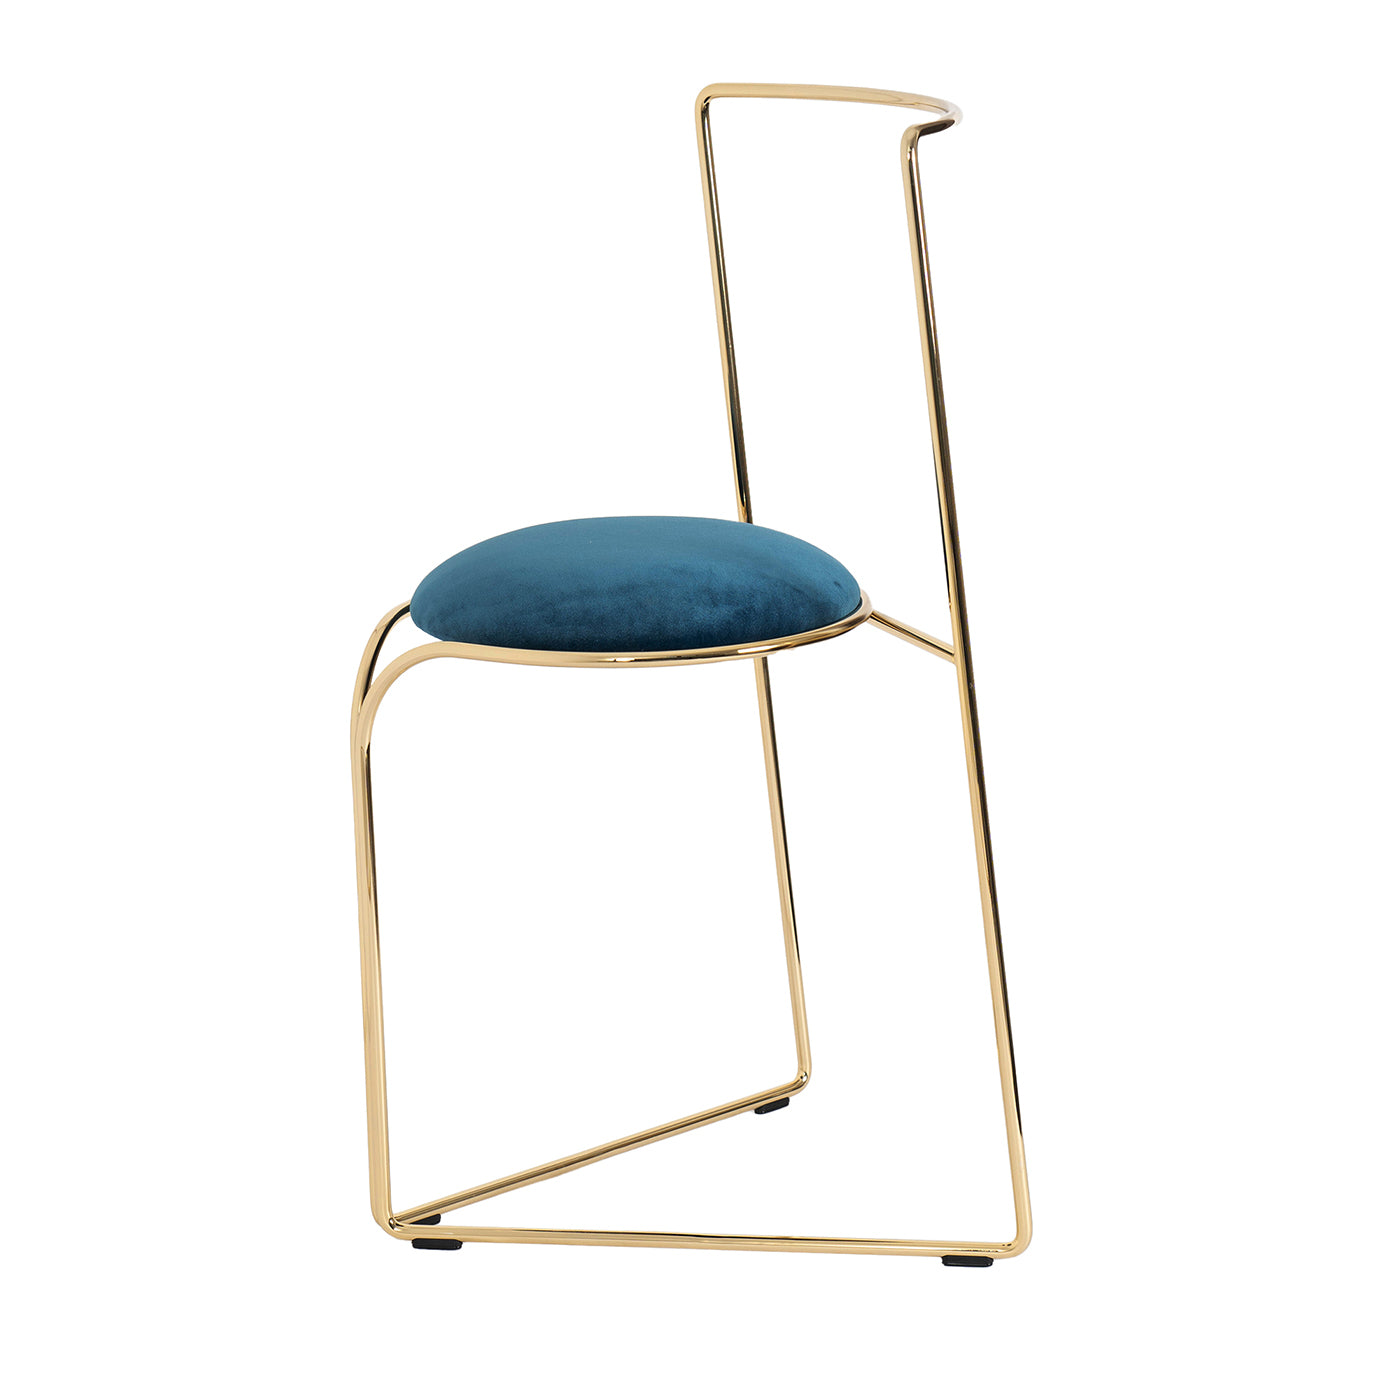 FLOW SCULPTURAL MINIMAL GOLD AND BLUE CHAIR - Main view